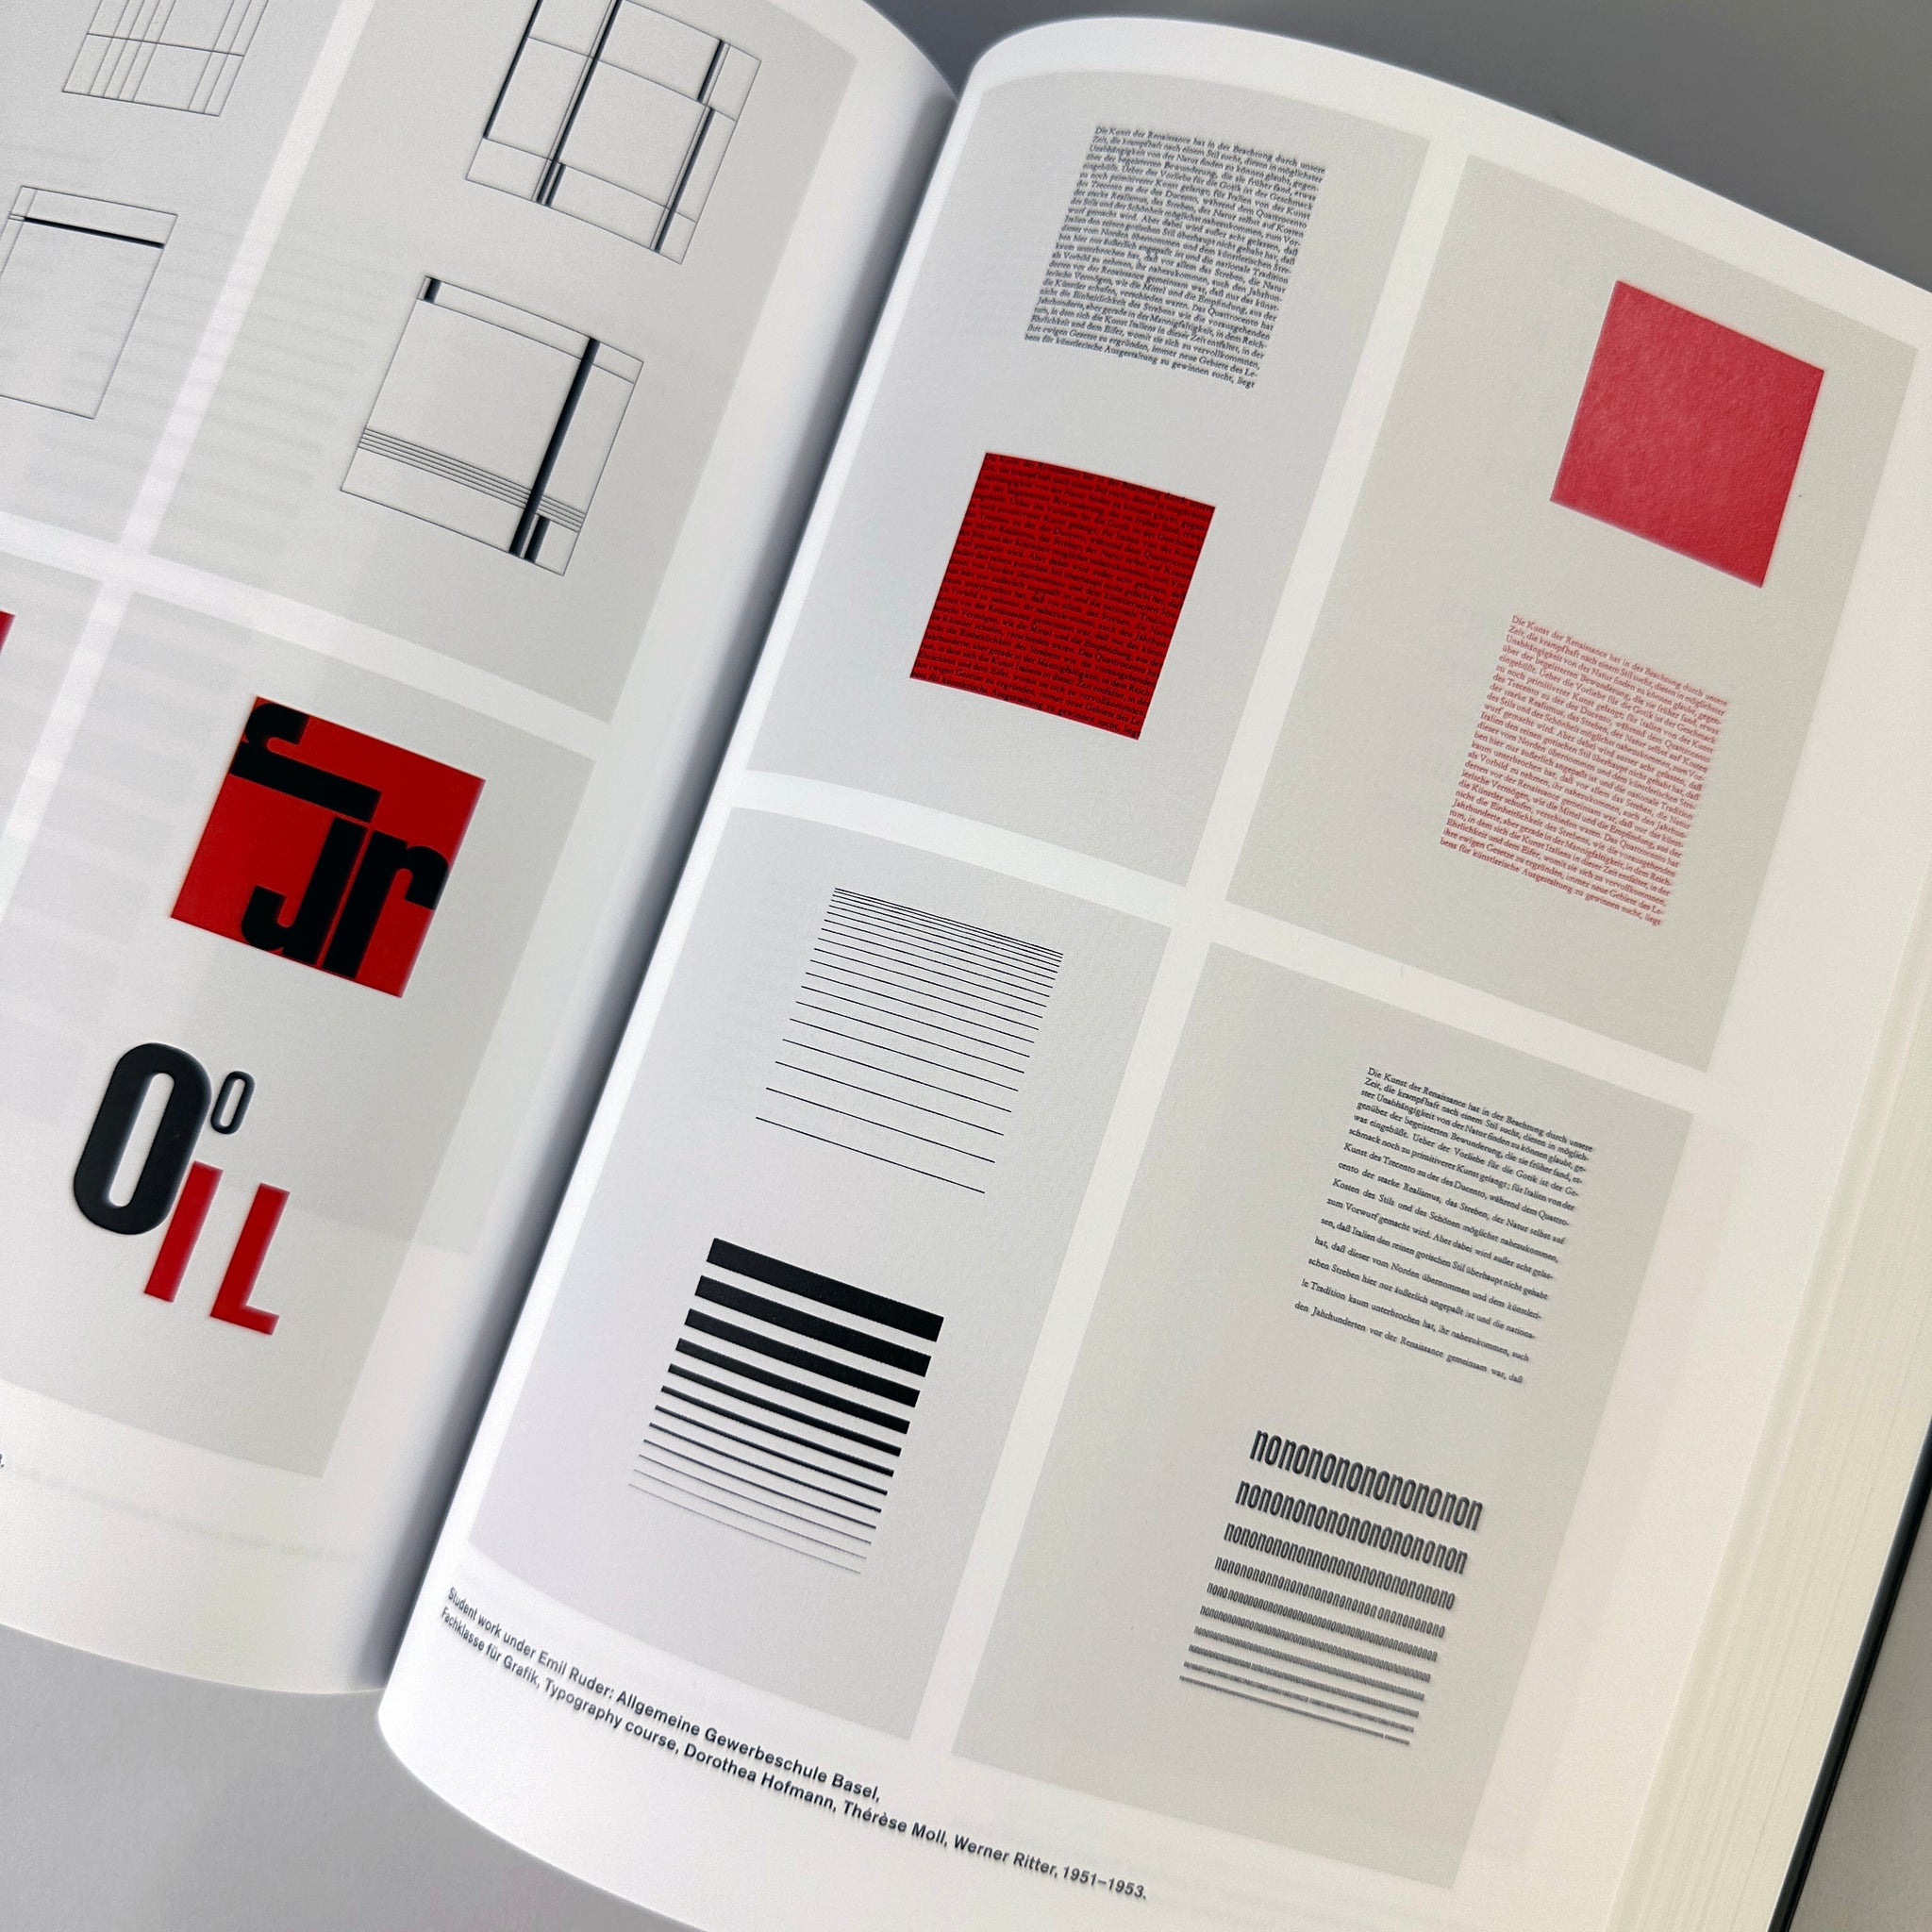 The Birth of a Style: The Influence of the Basel Educational Model on Swiss Graphic Design